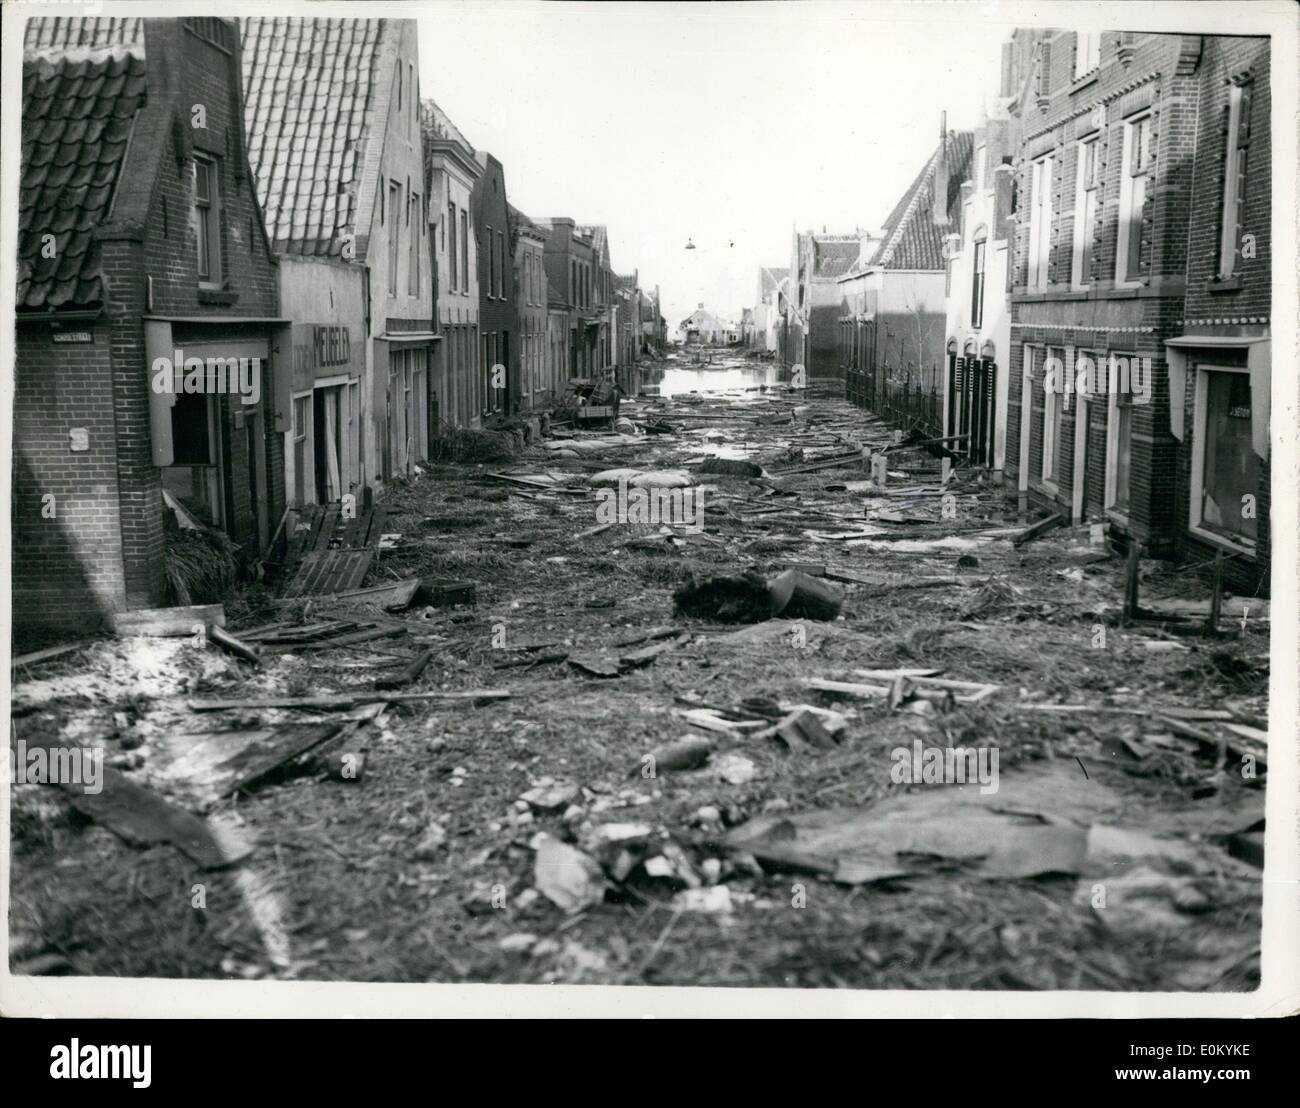 Feb. 02, 1953 - Latest pictures of the Flood Devastation in Holland: Photo shows Damage caused by the flood-waters in a street in Oude Tonge on overflakkes Island,. Between 350 and 400 people lost their lives here. Stock Photo